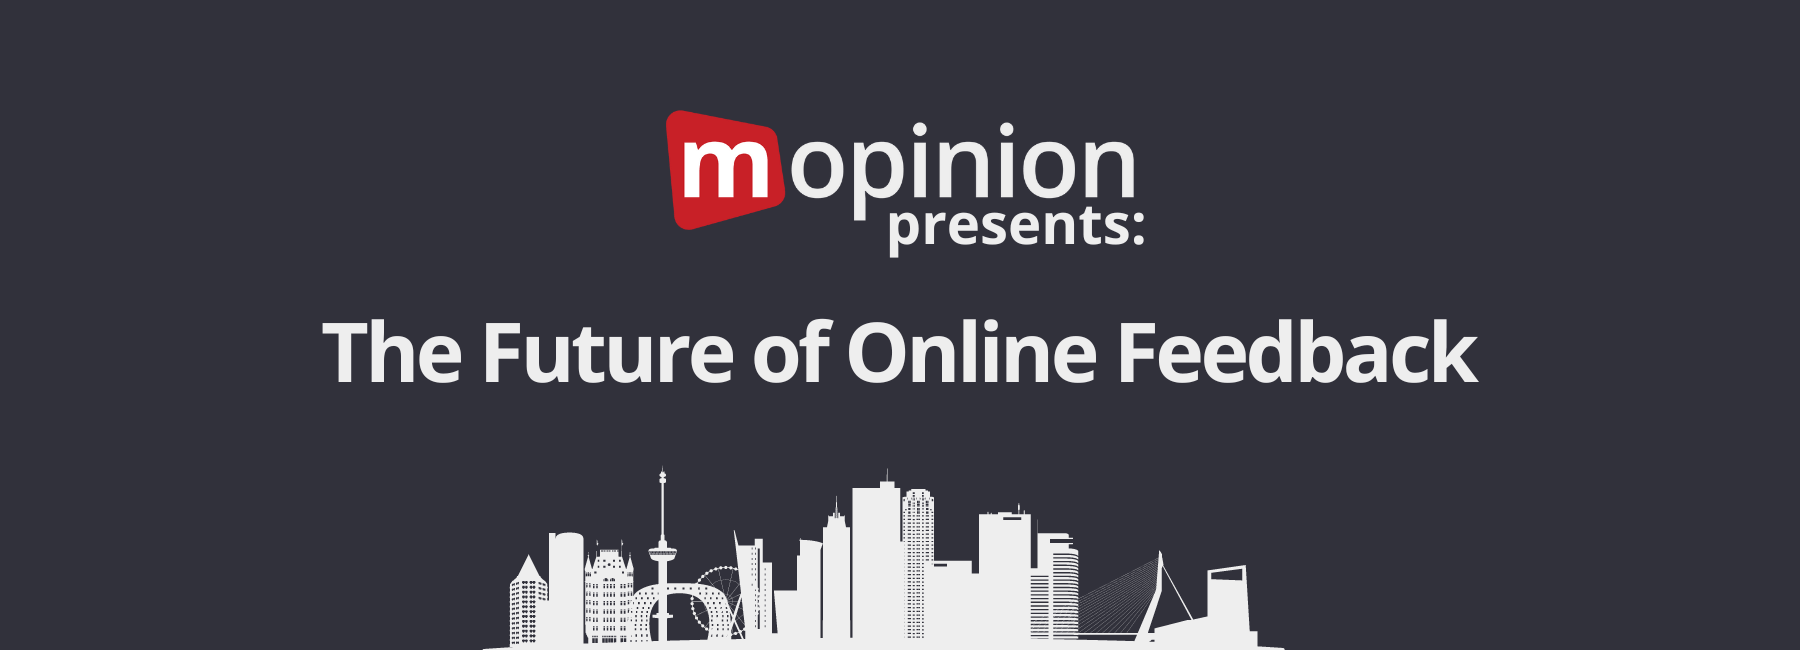 Terugblik Mopinion event: The Future of Online Feedback